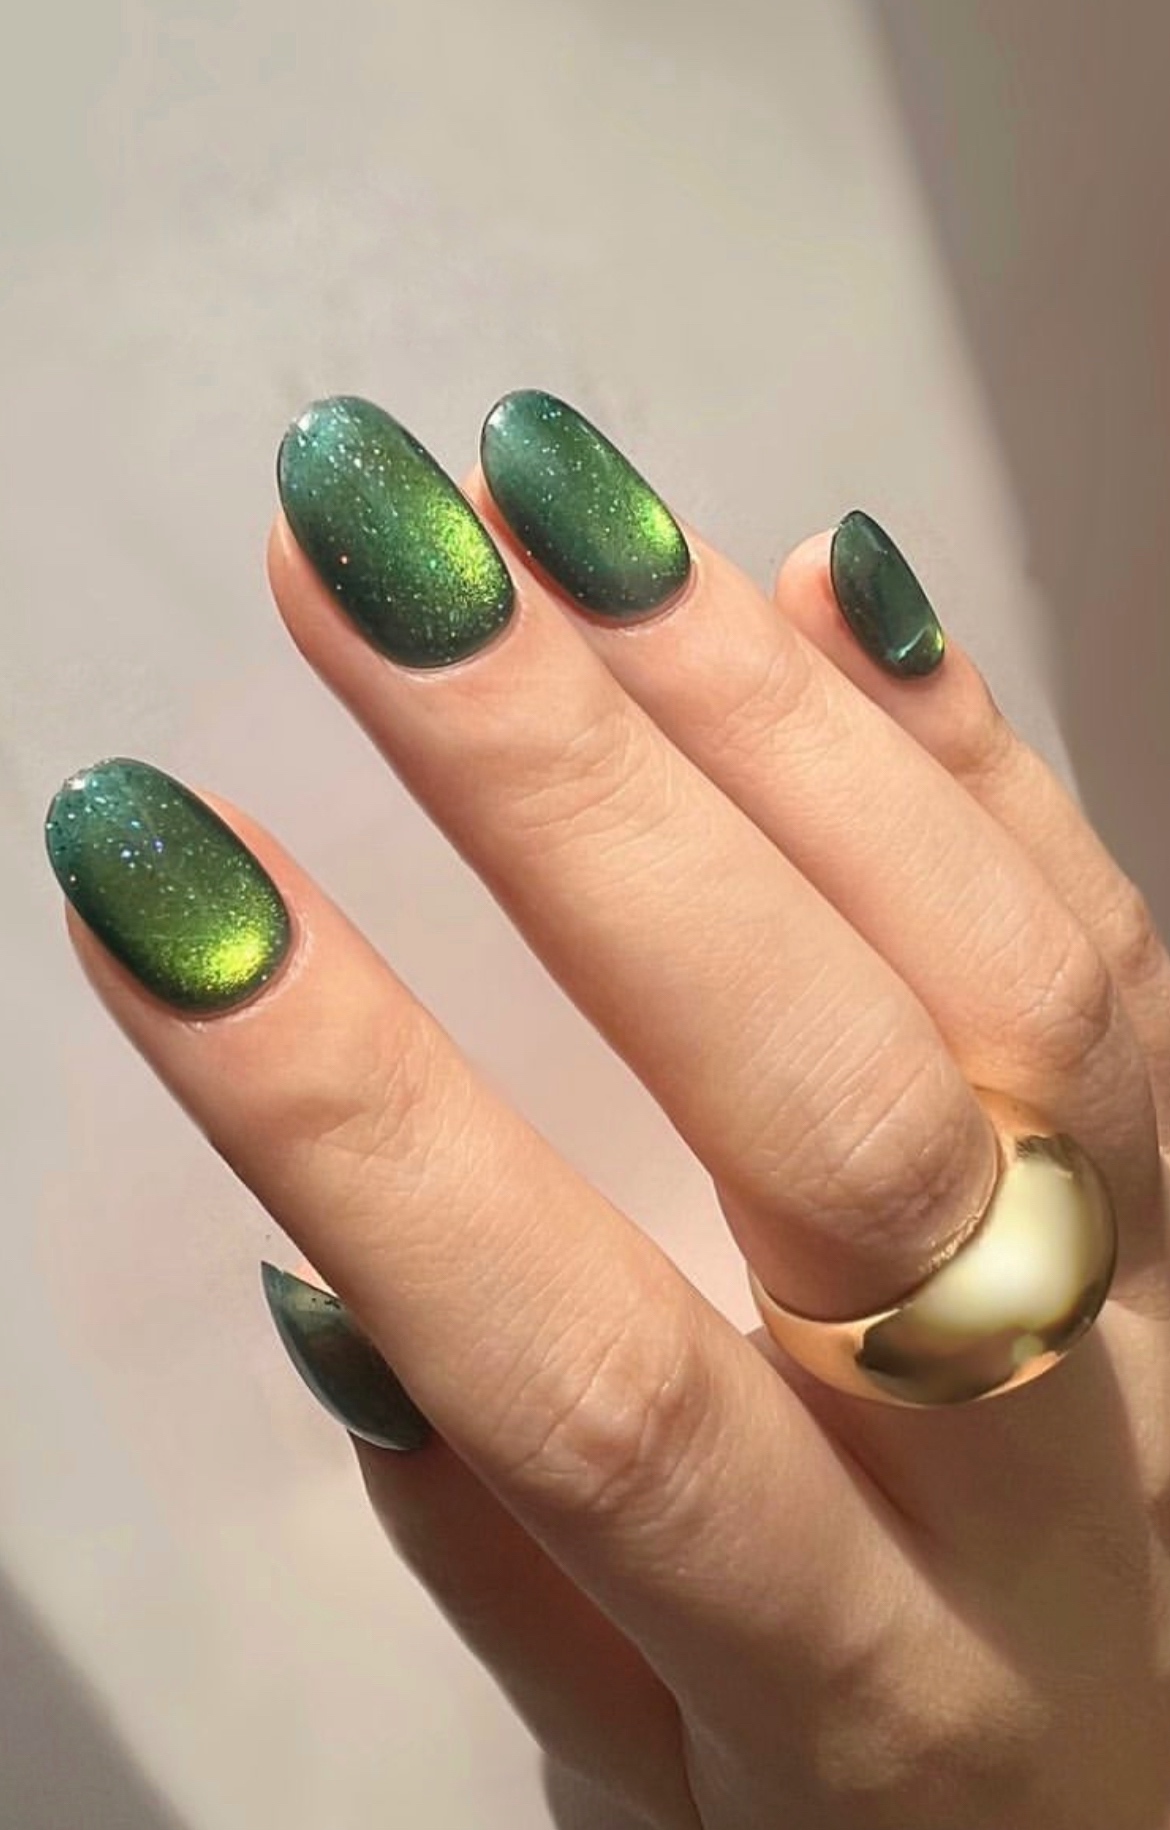 10 of best nail art designs to ask for at your next appointment  Metro News